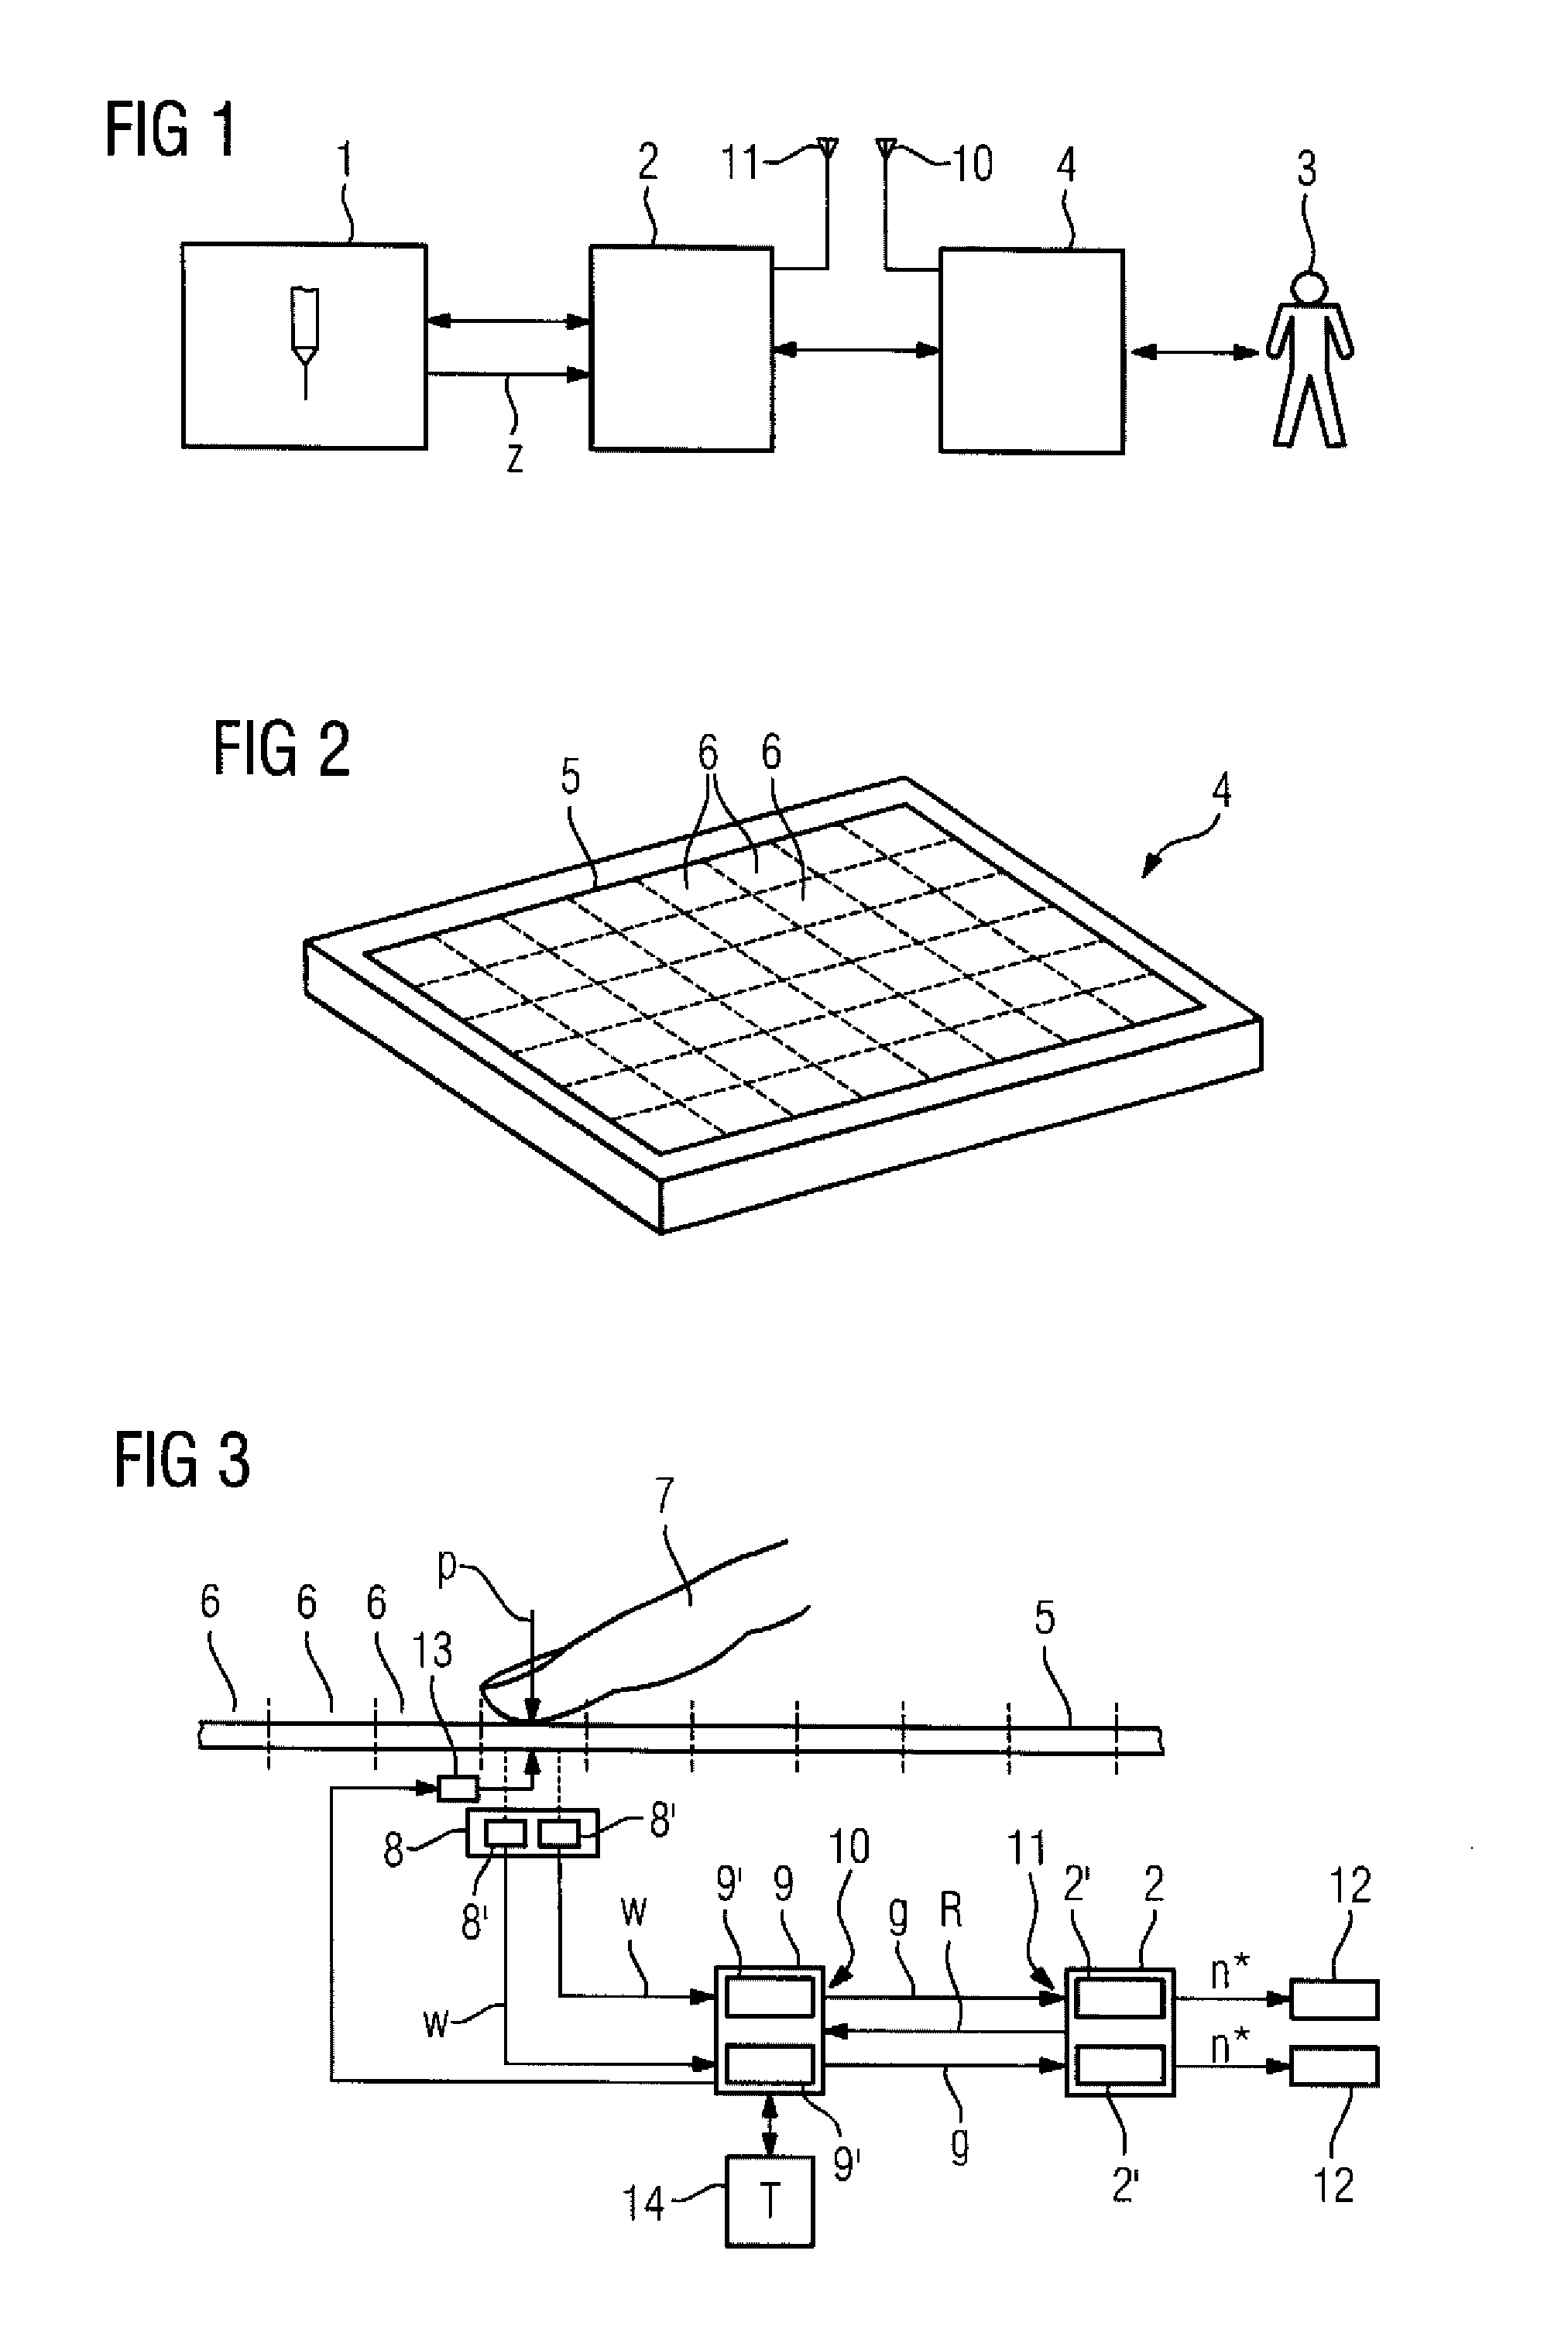 Touchscreen with analog pressure detection as user interface for industrial technical device